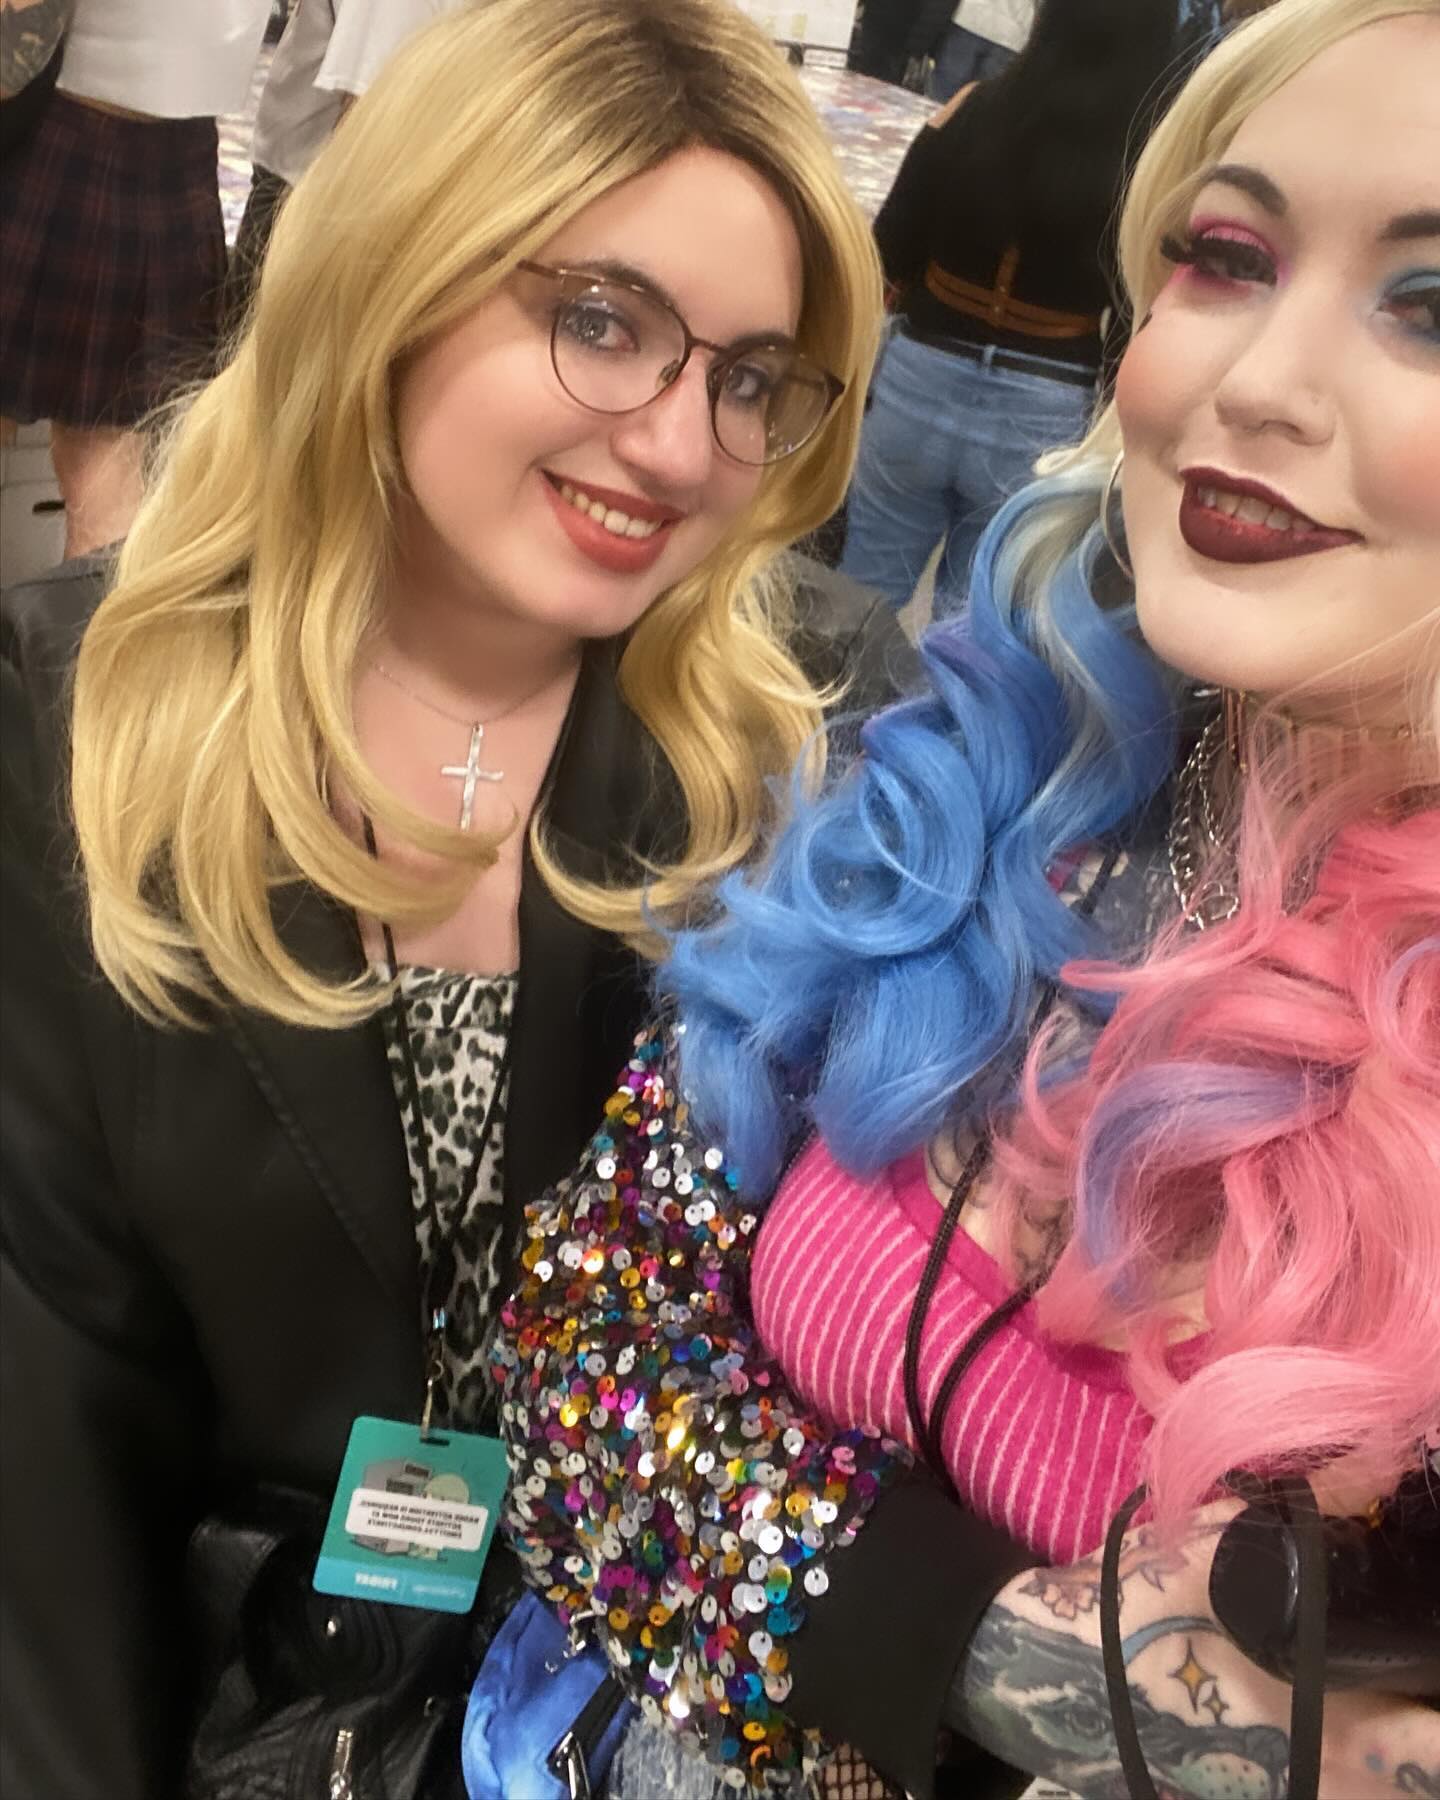 Comicon was super fun! 🤩 and I really enjoyed cosplaying as Harley Quinn for the first time 💕 might have to do it again 🤪

Also look how cute me and @batman.in.seattle  are ❤️‍🔥